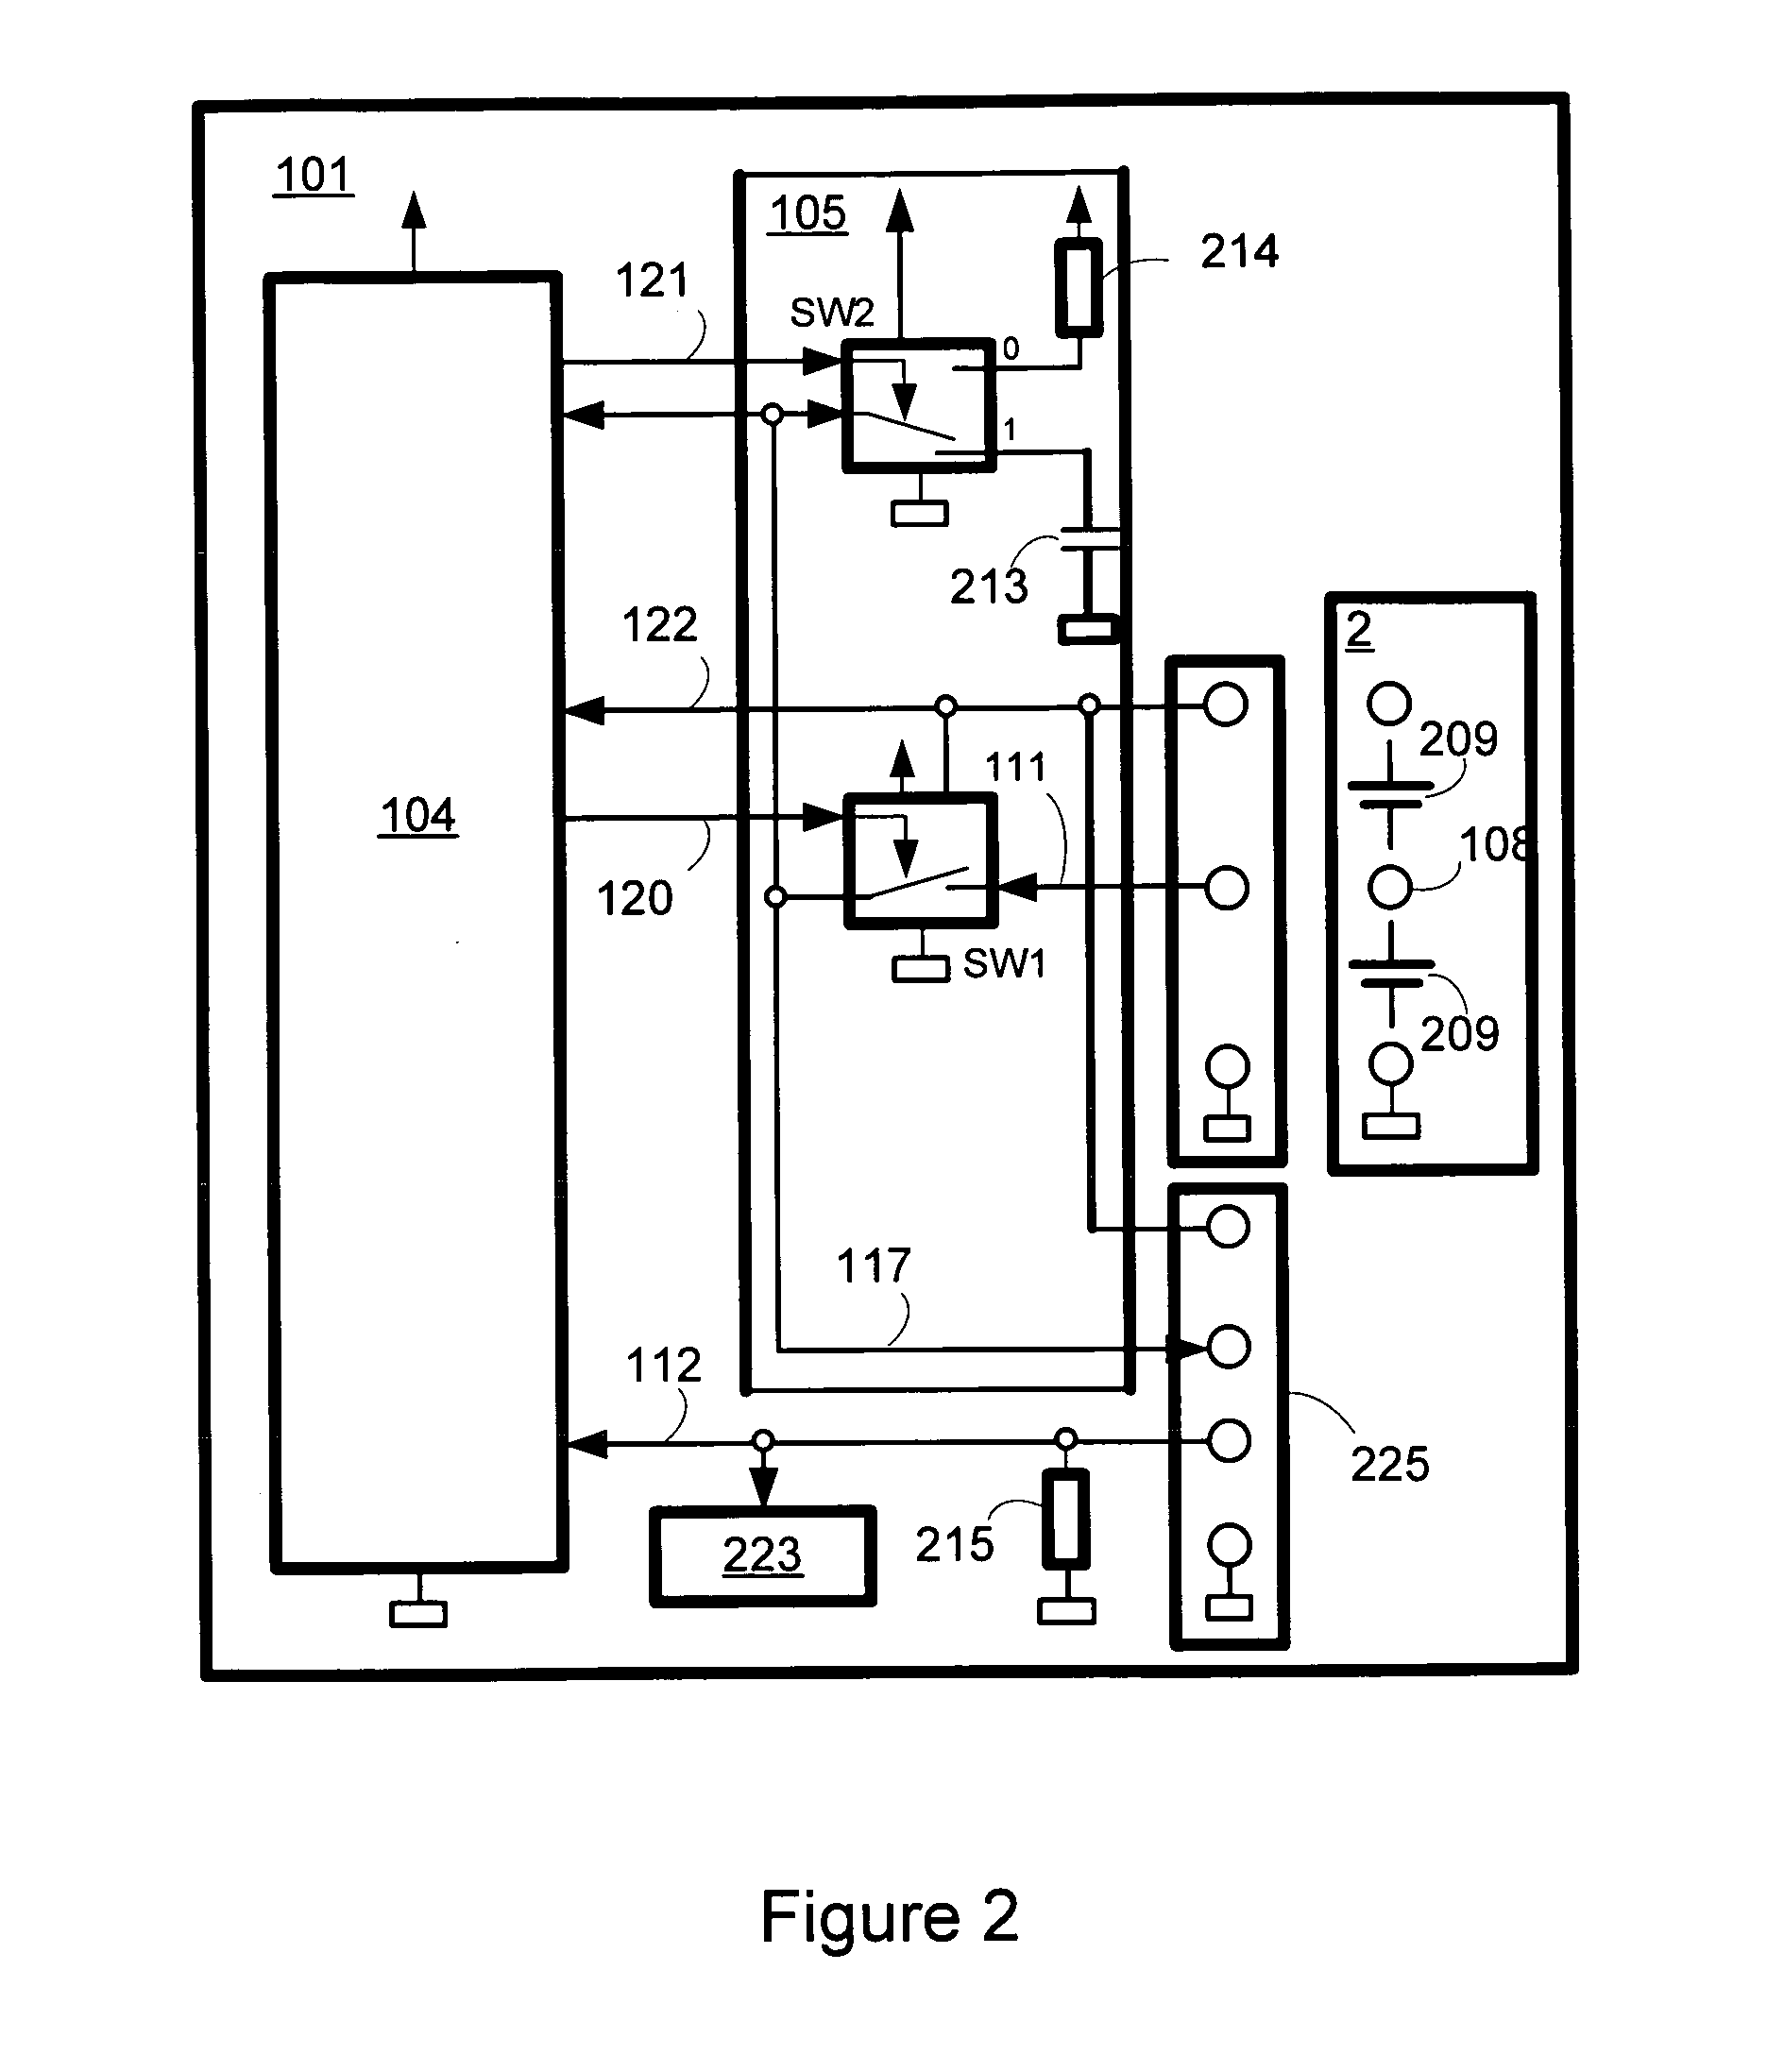 Battery determination system for battery-powered devices